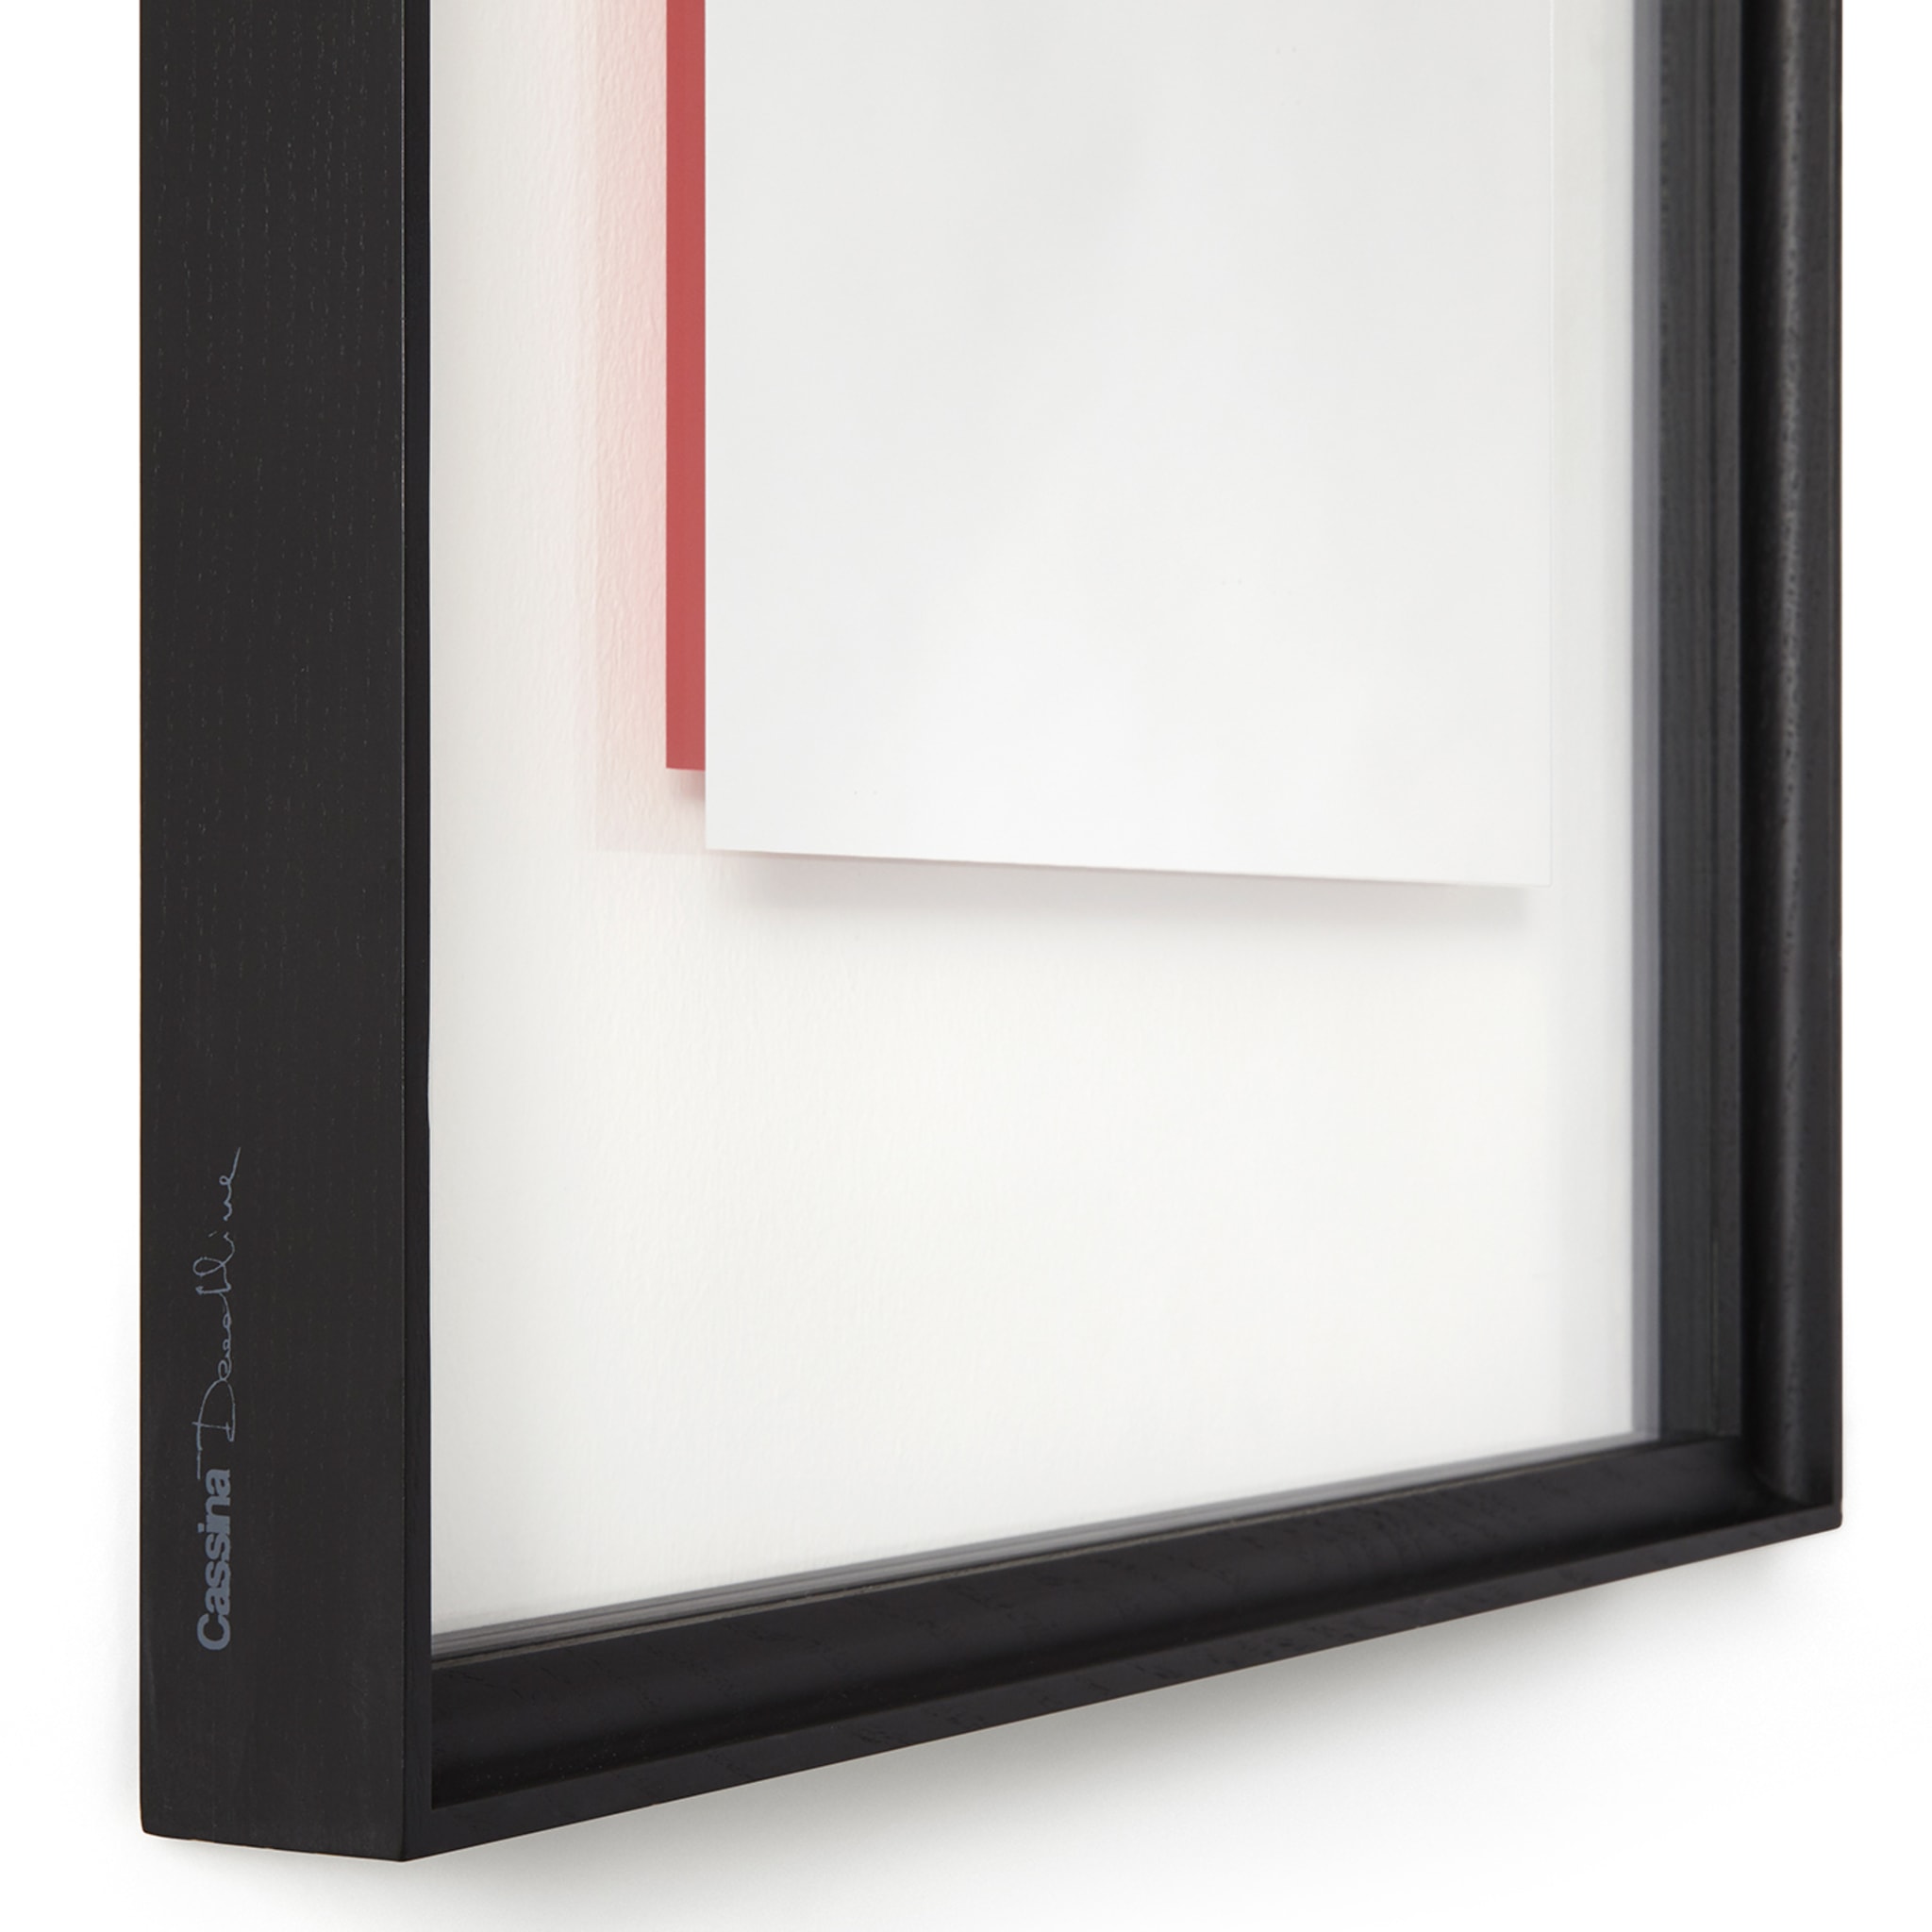 Deadline Who's Afraid of Red Rectangular mirror by Ron Gilad #2 - Alternative view 1